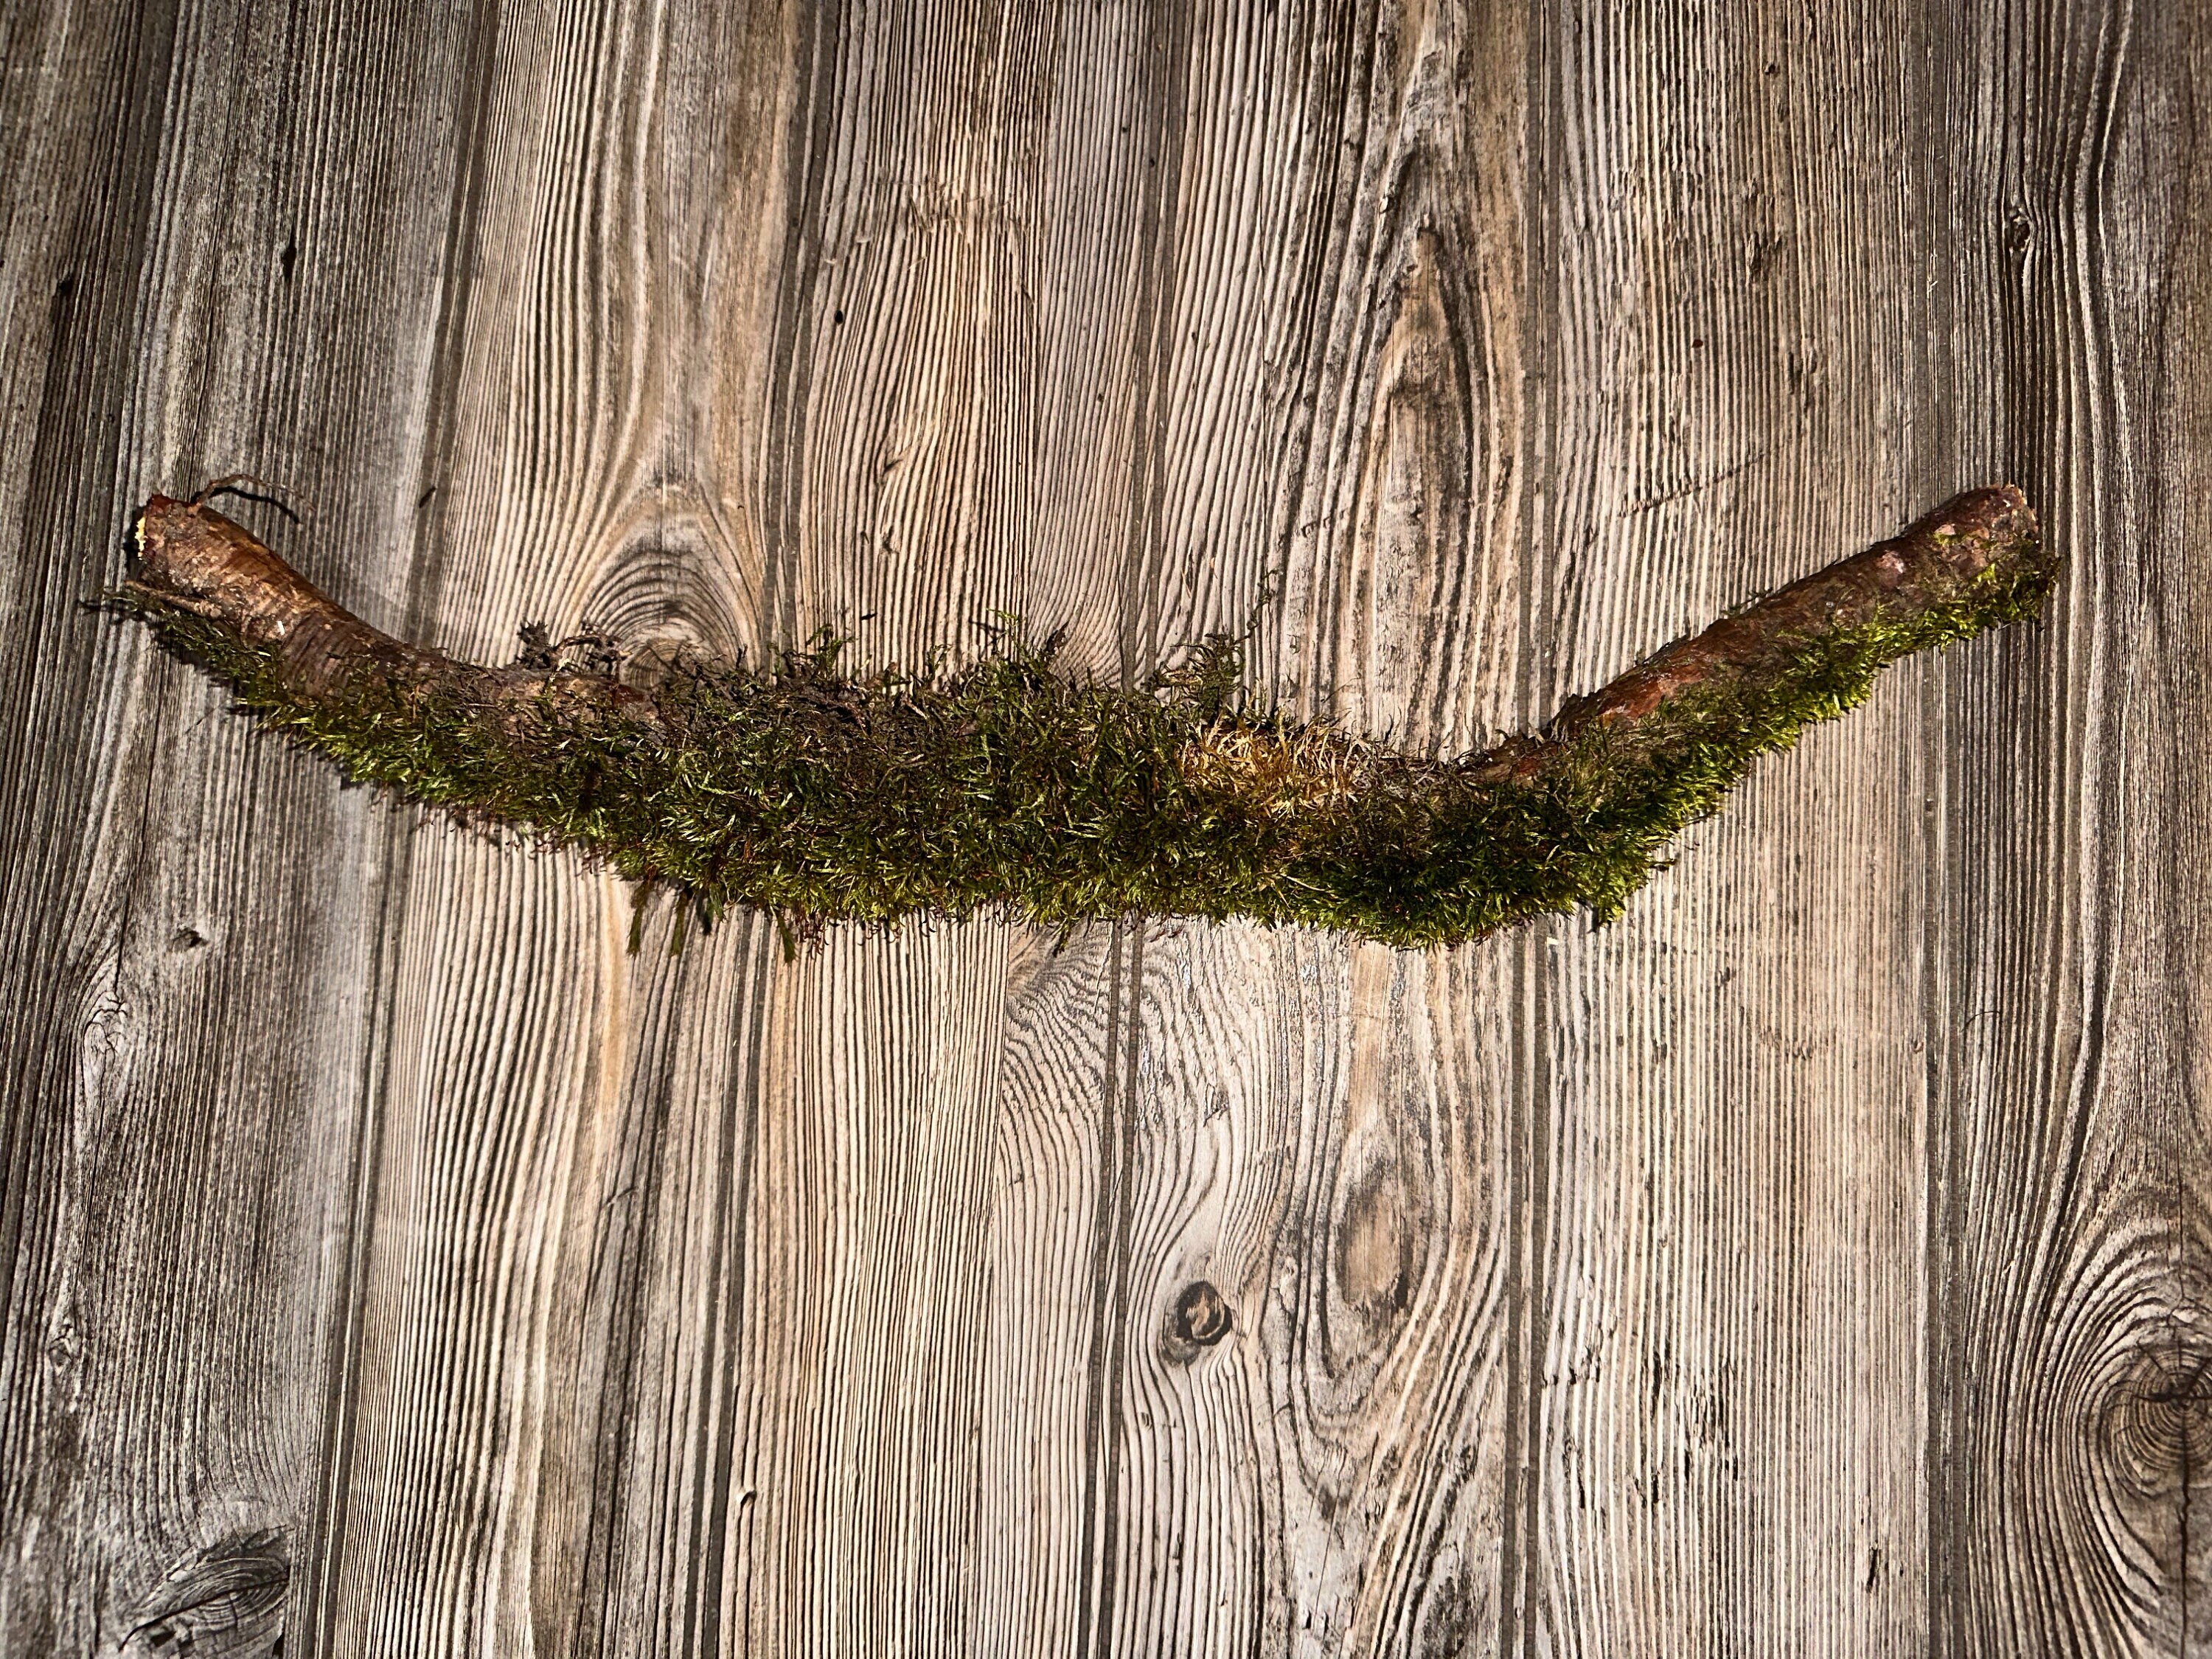 Moss Covered Log, Mossy Log, 18 Inches Long by 2 Inches Wide and 2 Inches High